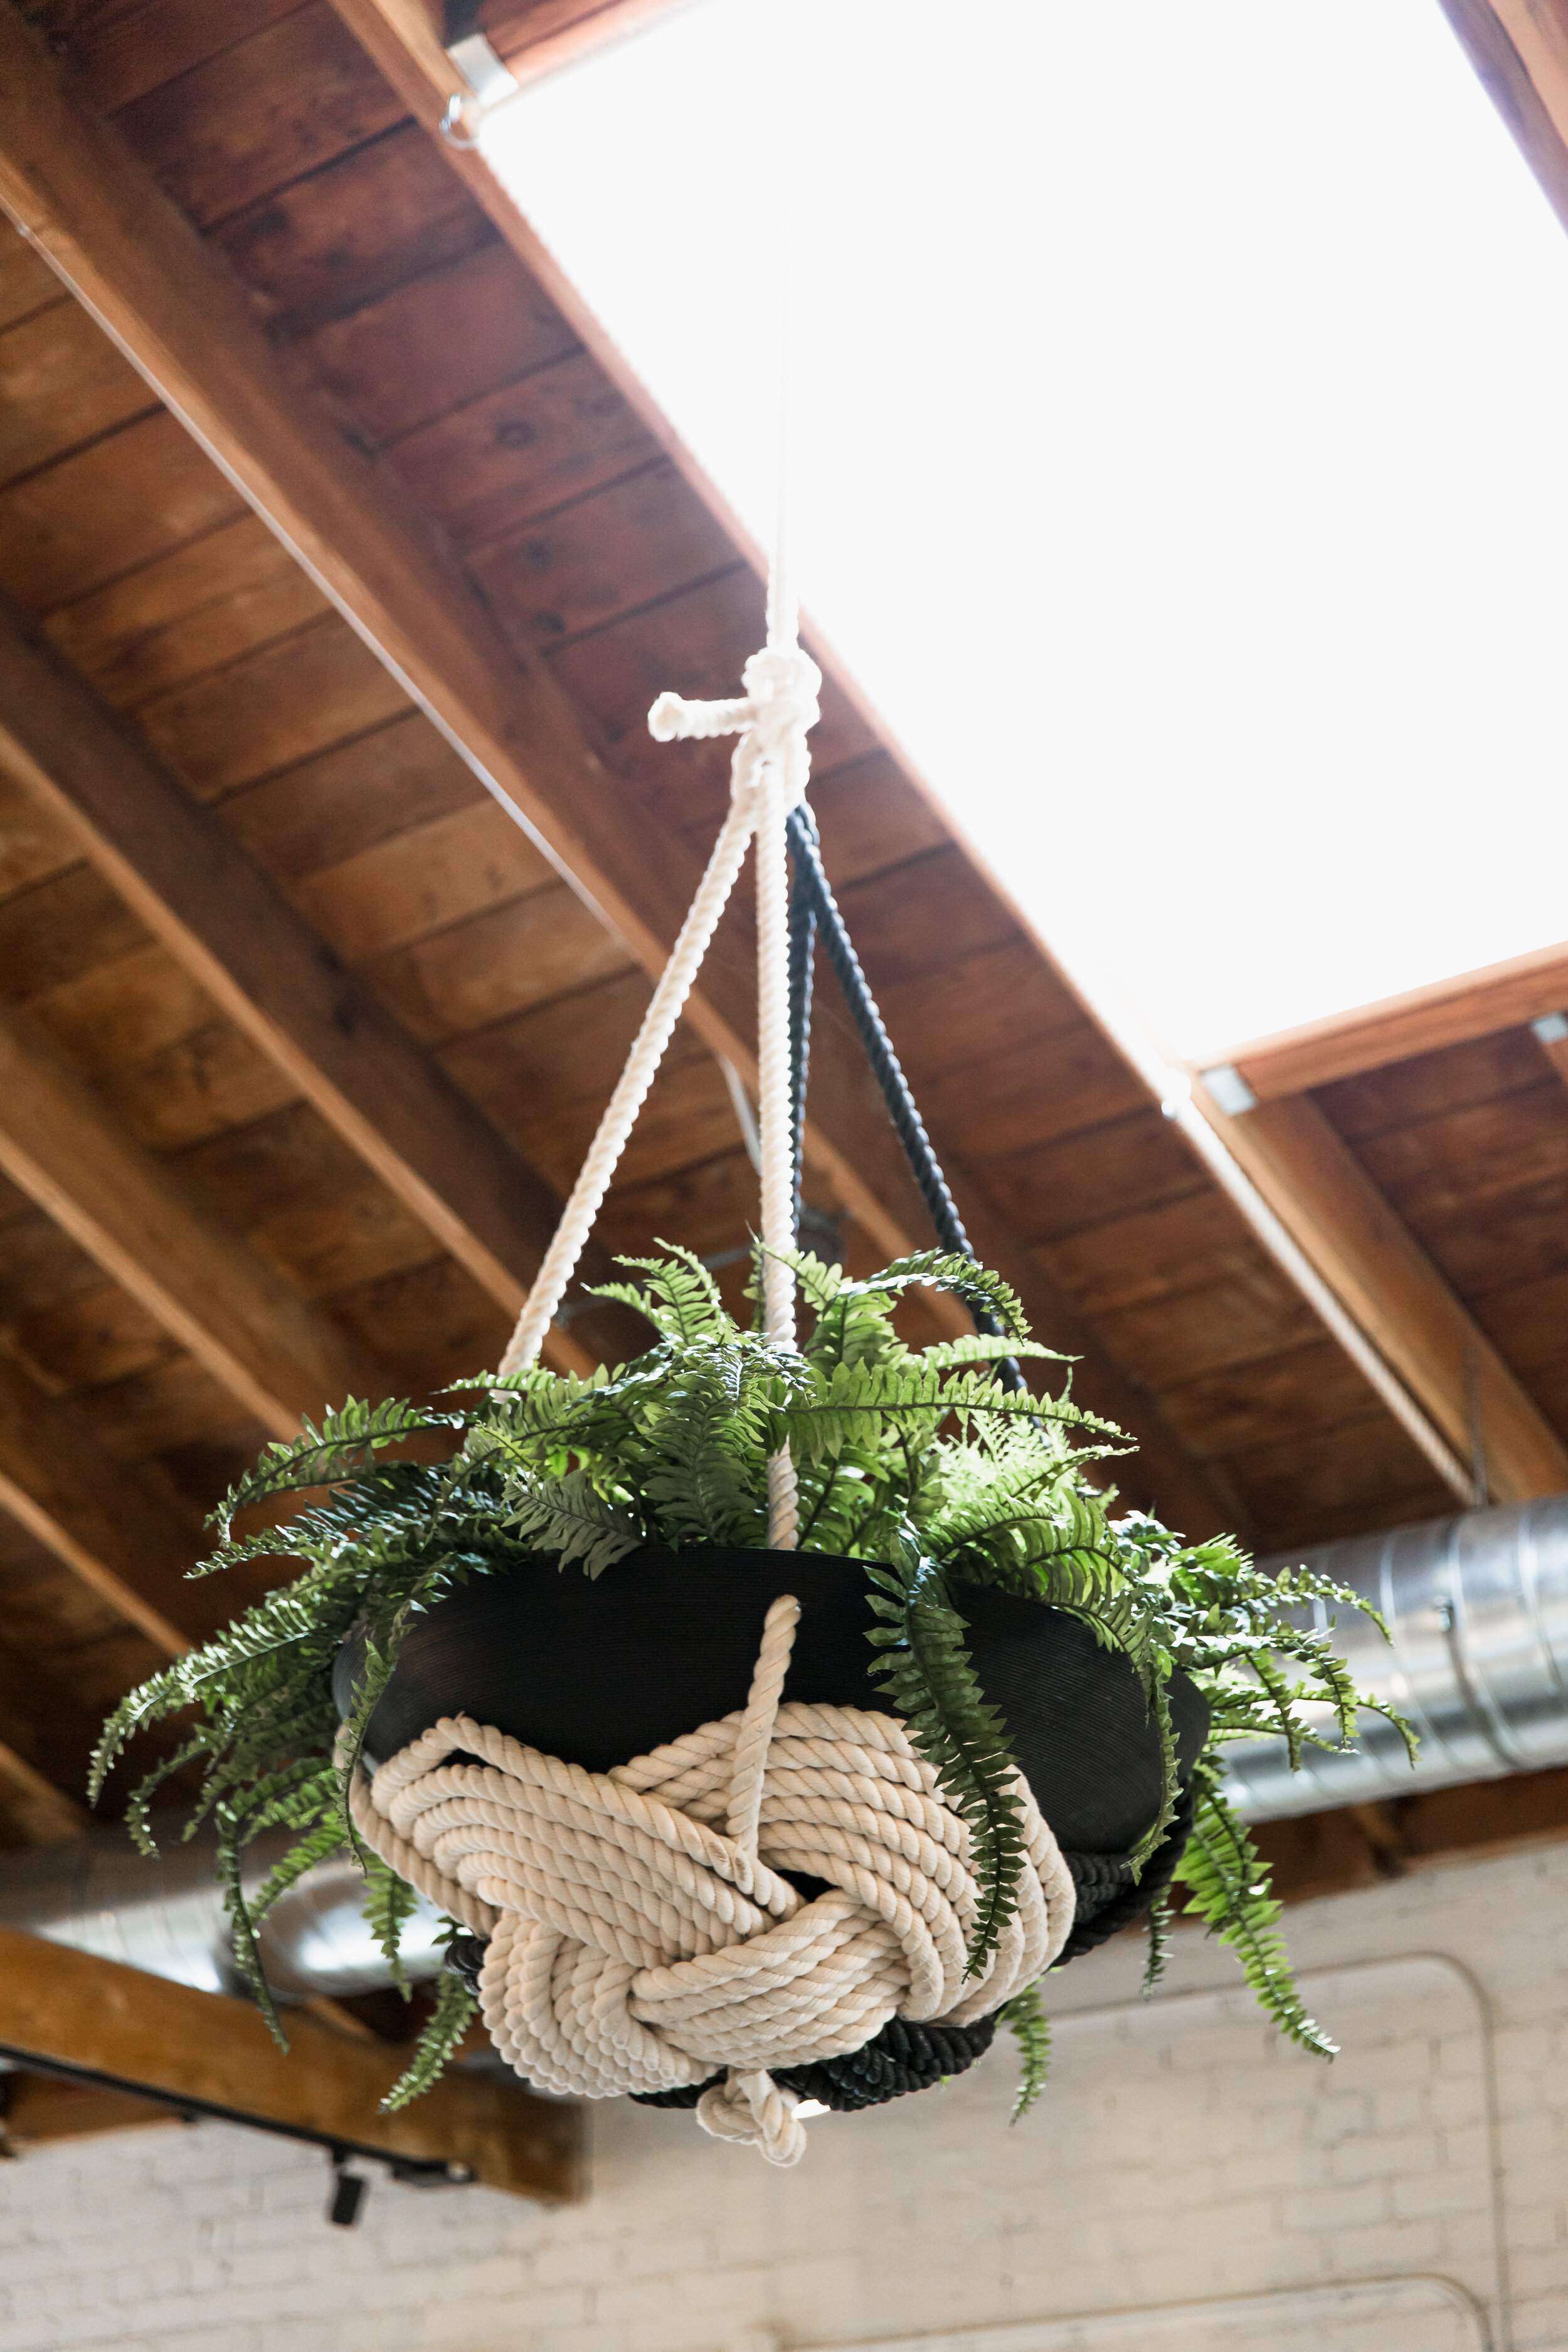 Large Skylight Hanging Plant Office Party.jpg